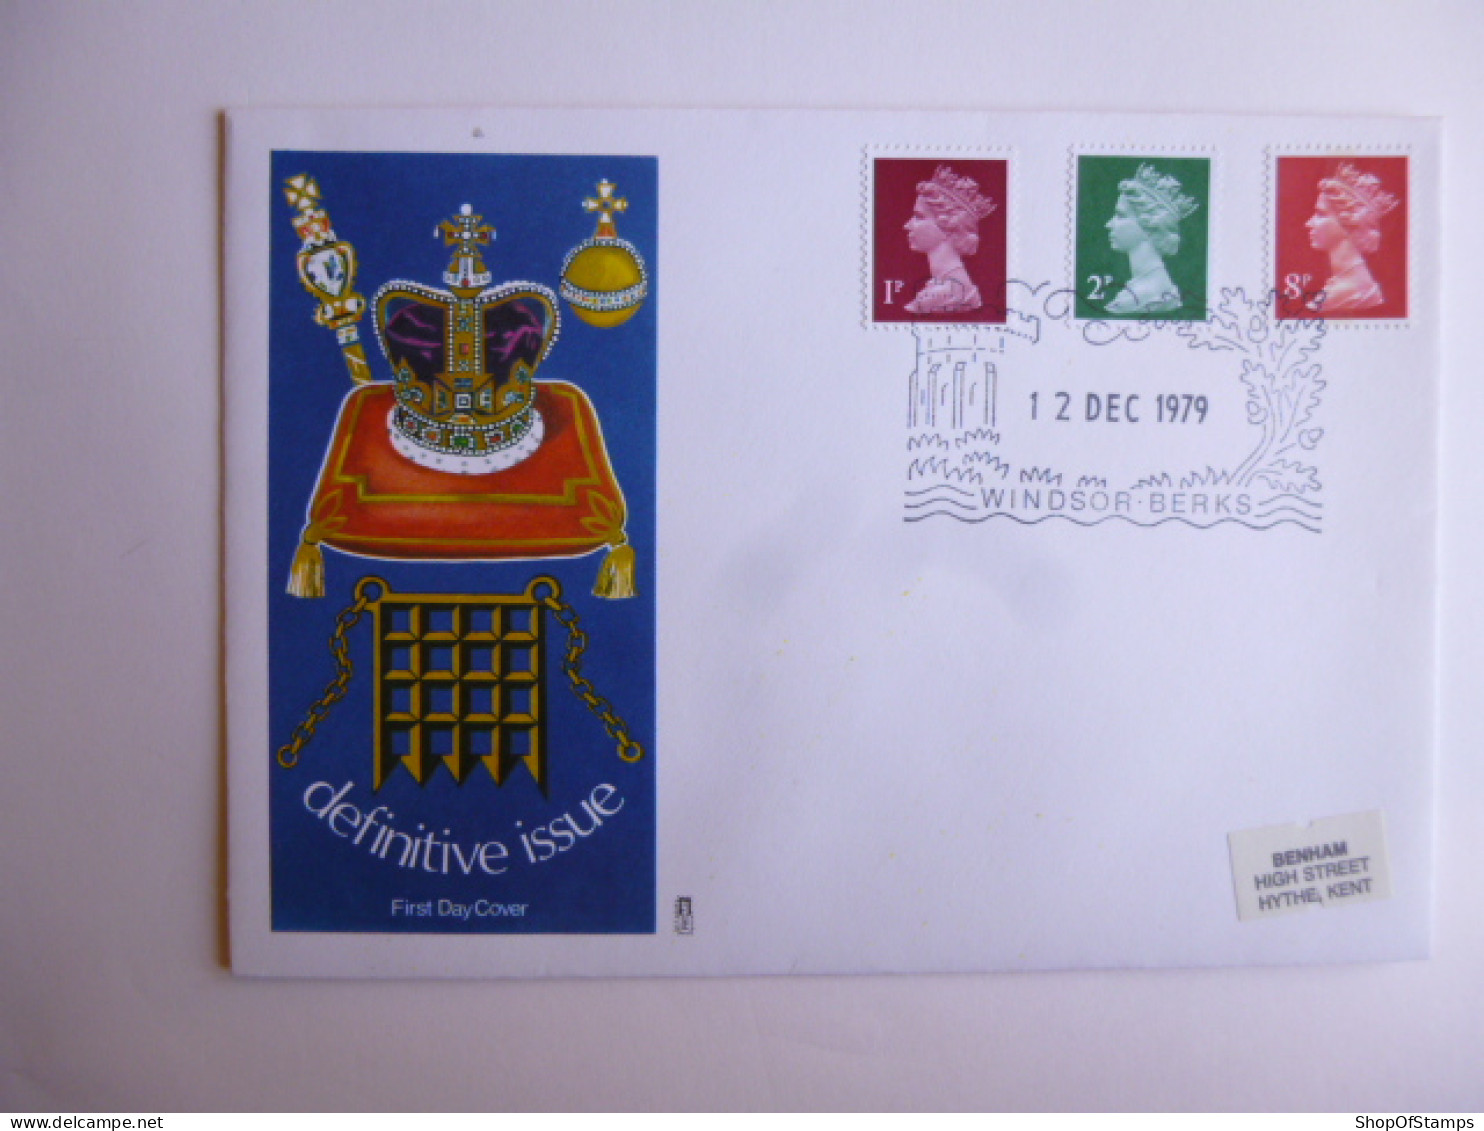 GREAT BRITAIN SG DEFINITIVES ISSUE DATED  12.12.79 FDC  - Unclassified